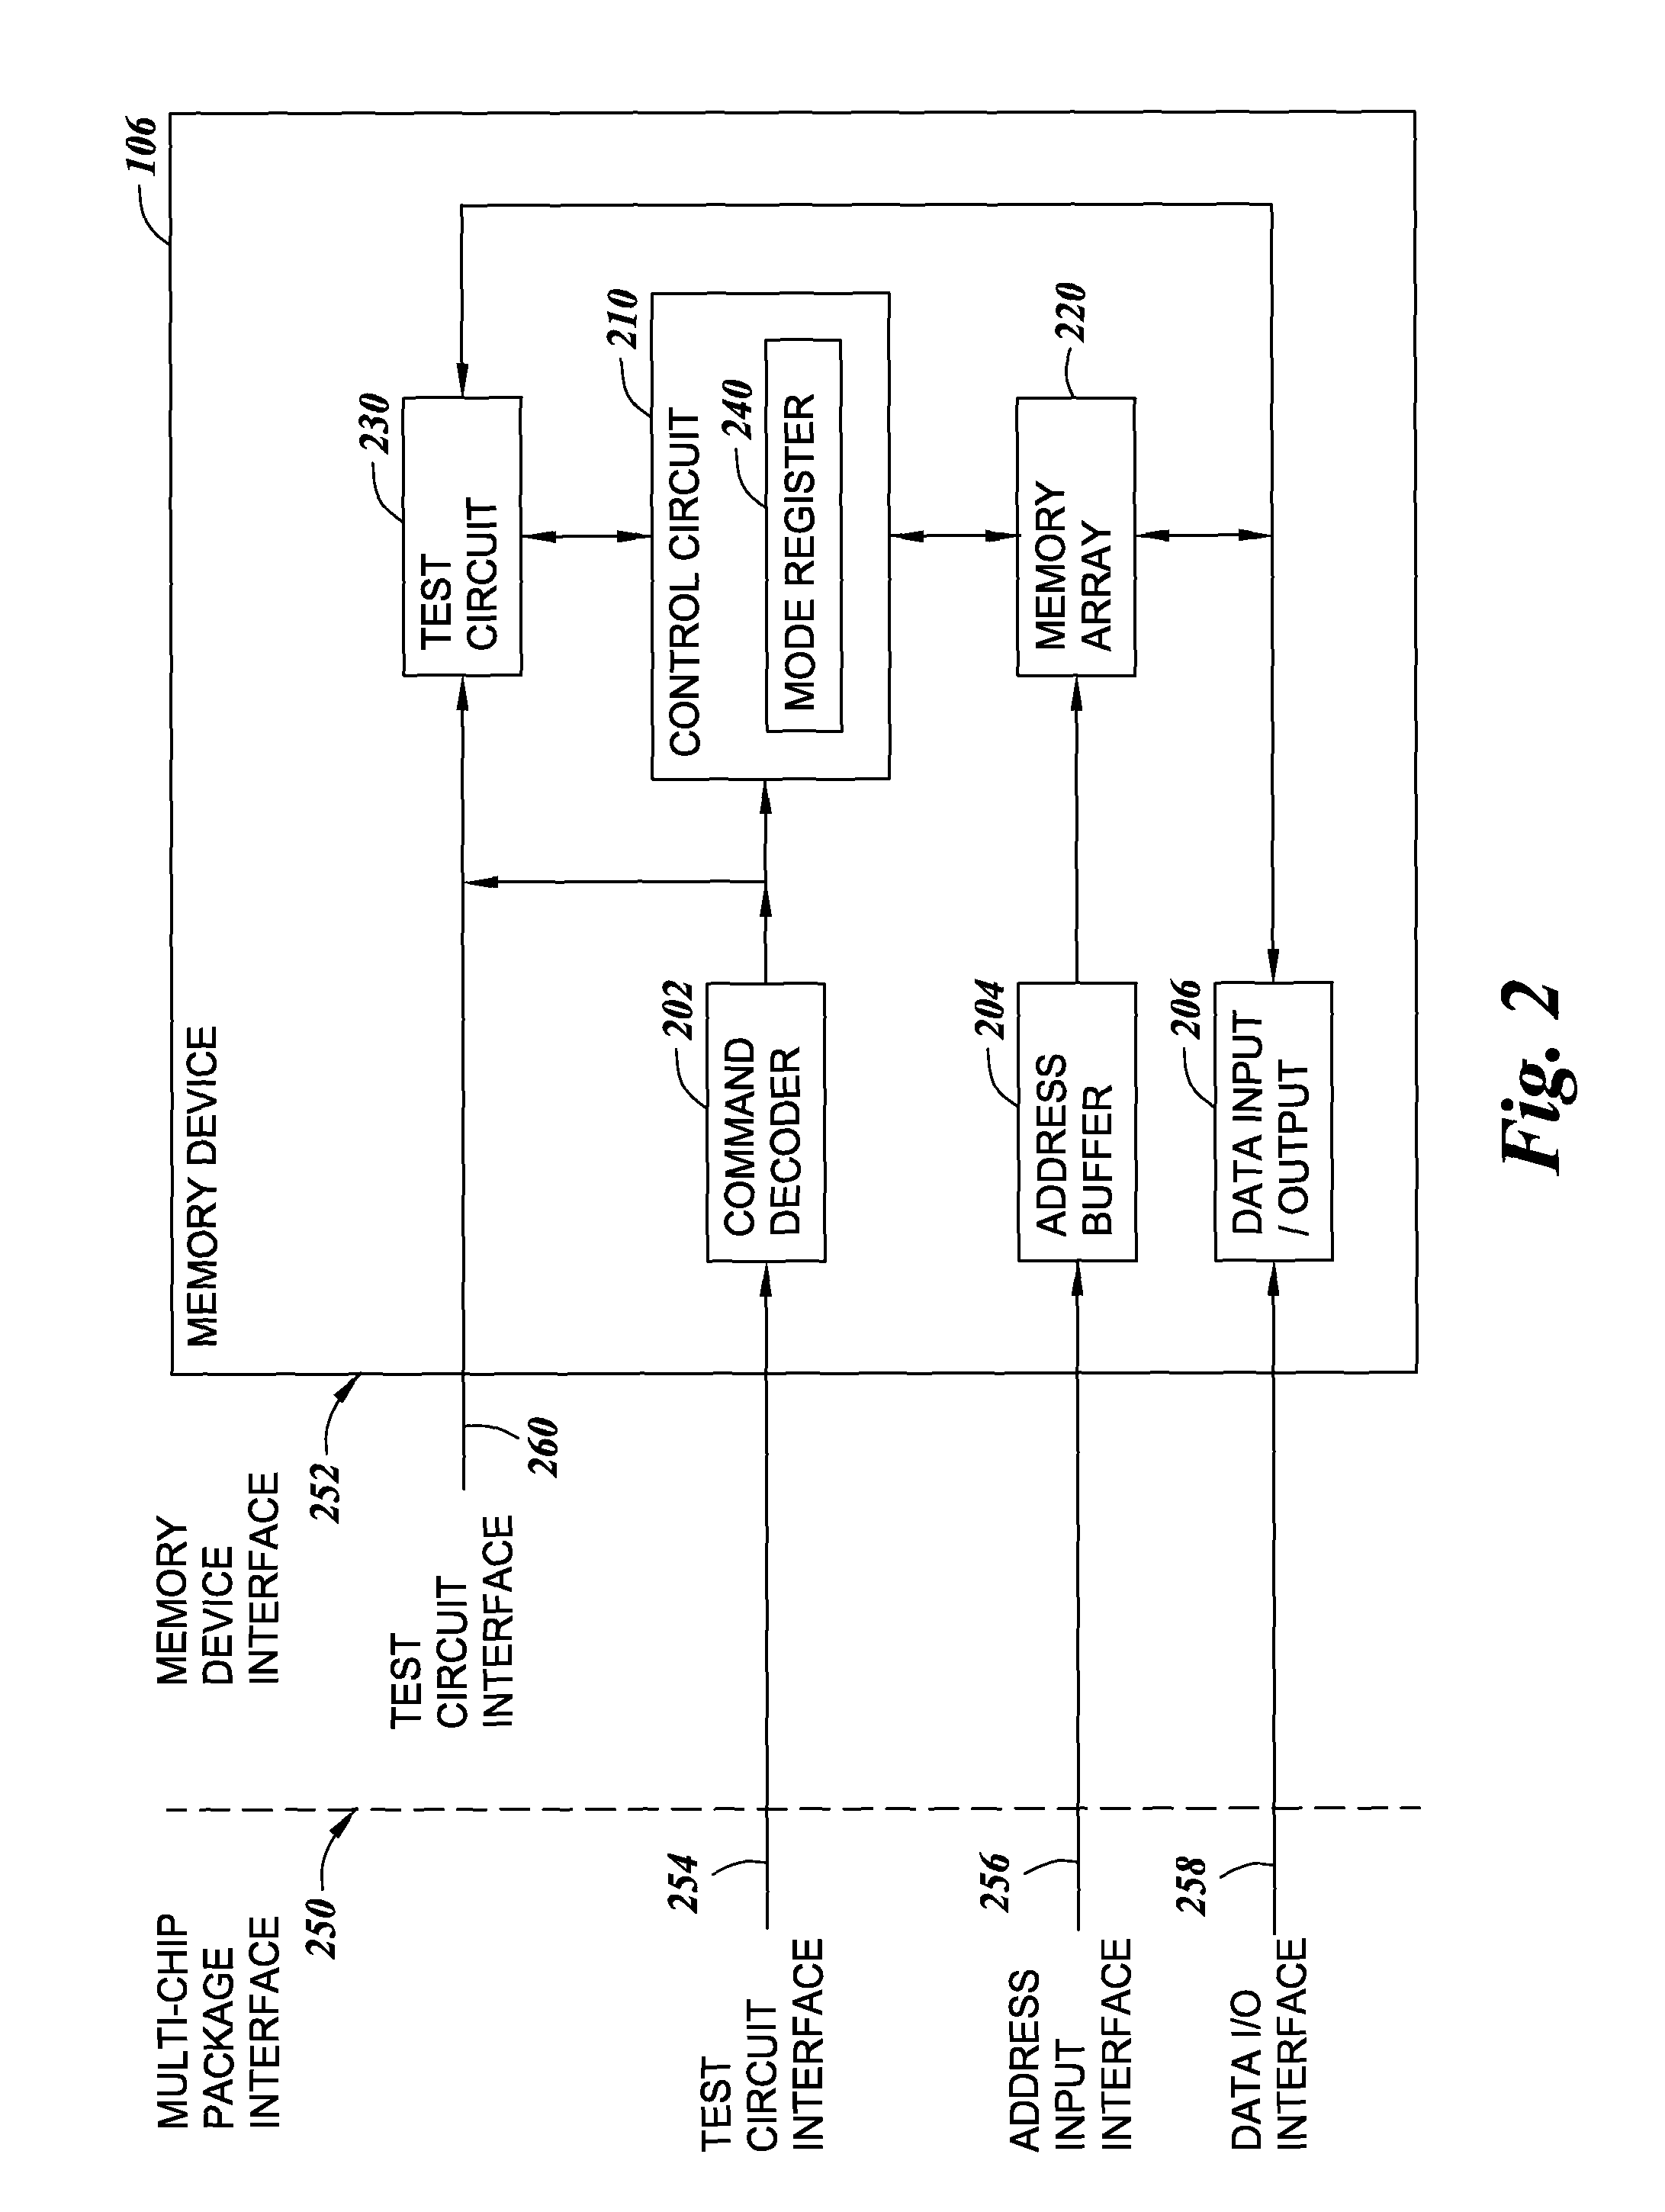 Method for self-test and self-repair in a multi-chip package environment